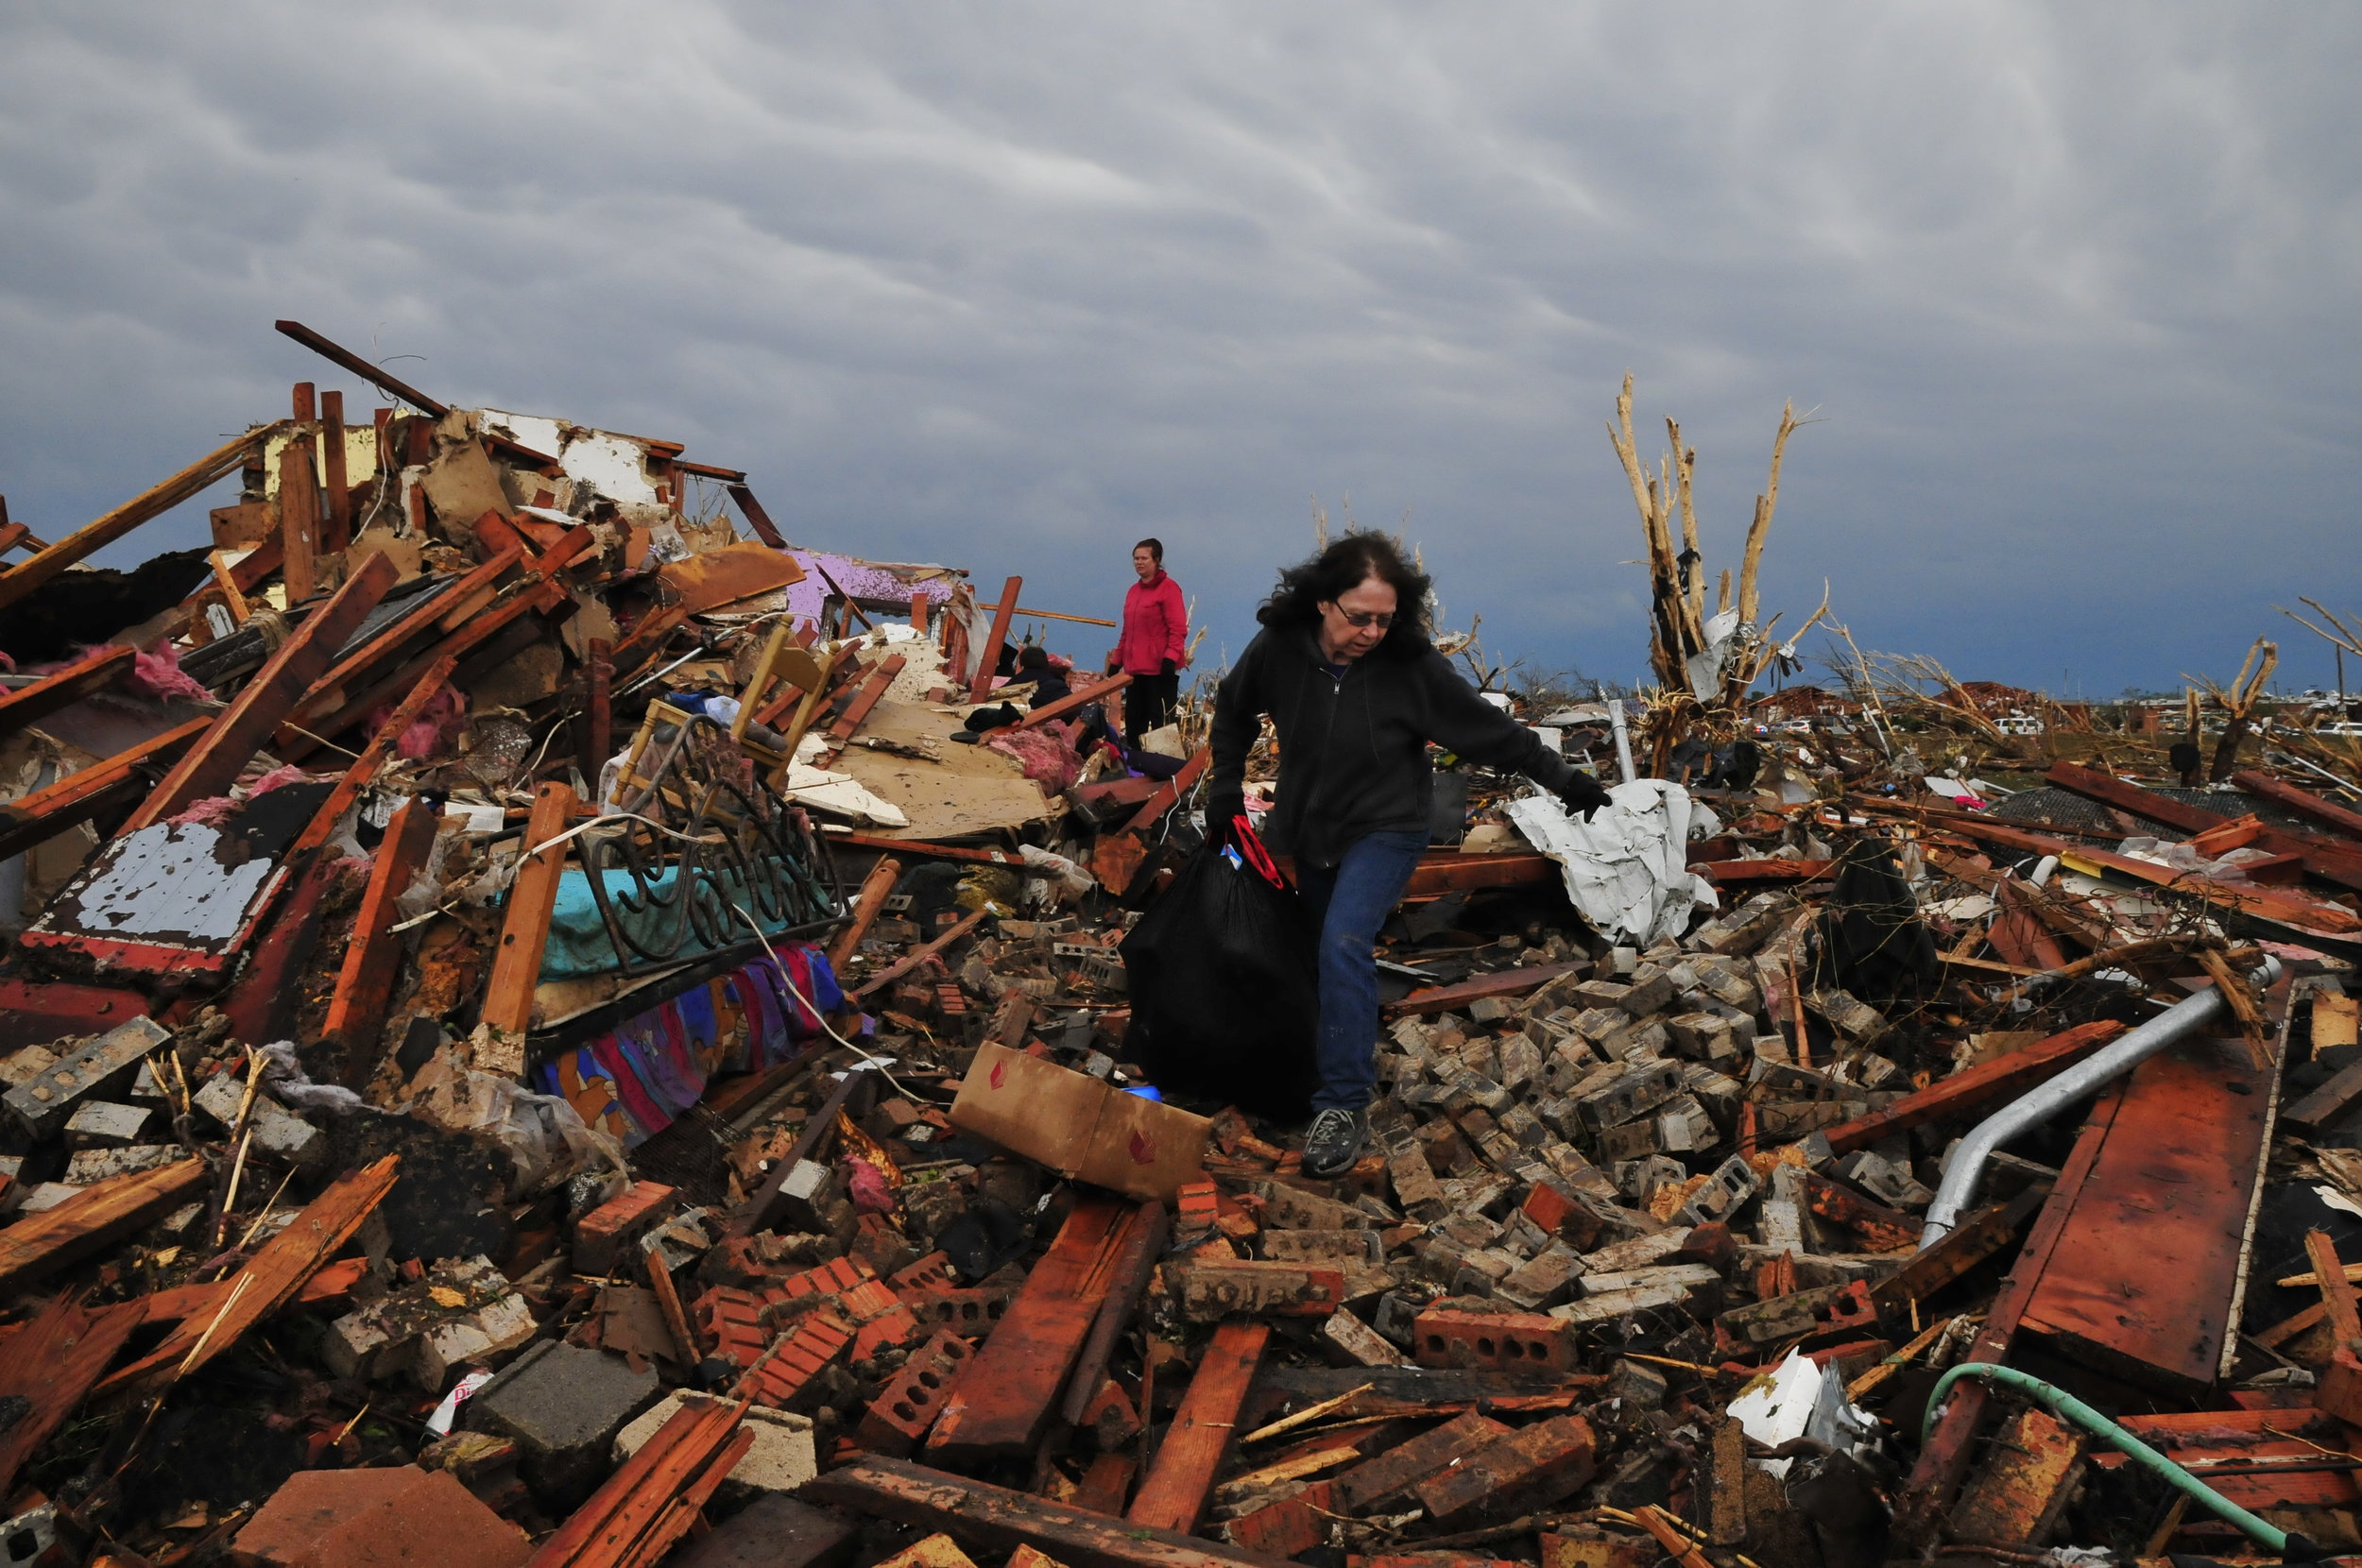  Debbie Mayhle, right, and her daughter Kristi Jones retrieve some of Debbie's belongings from her home which was in the direct path of yesterdays tornado on May, 21 in Moore Oklahoma. 